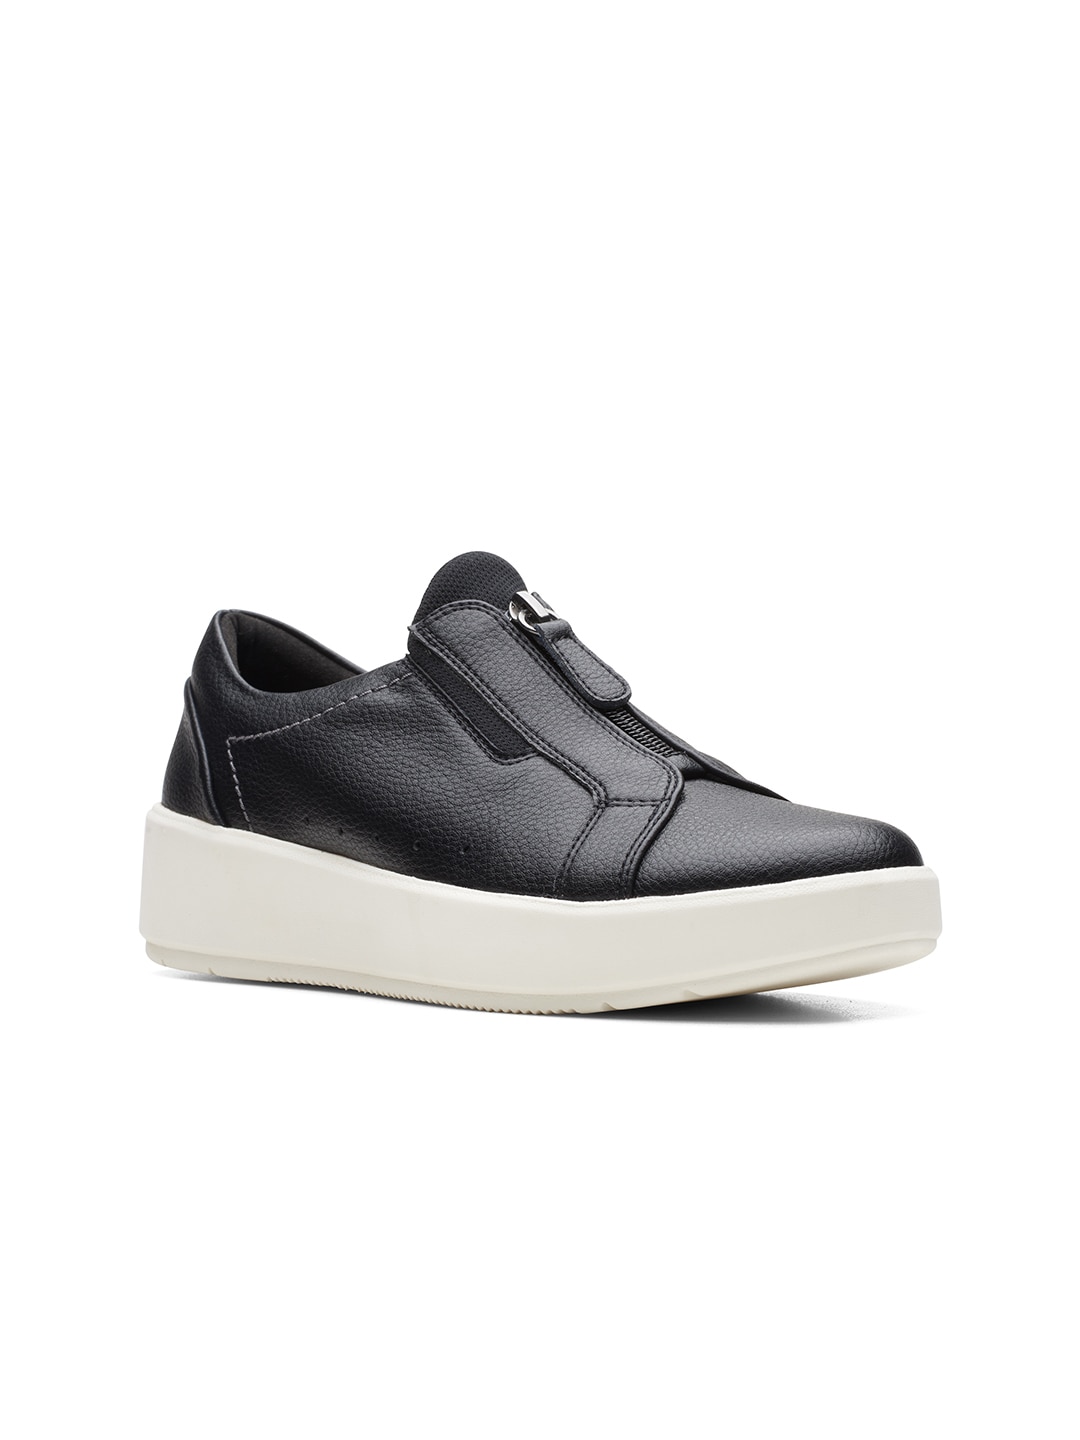 Clarks Women Black Textured Leather Slip-On Sneakers Price in India